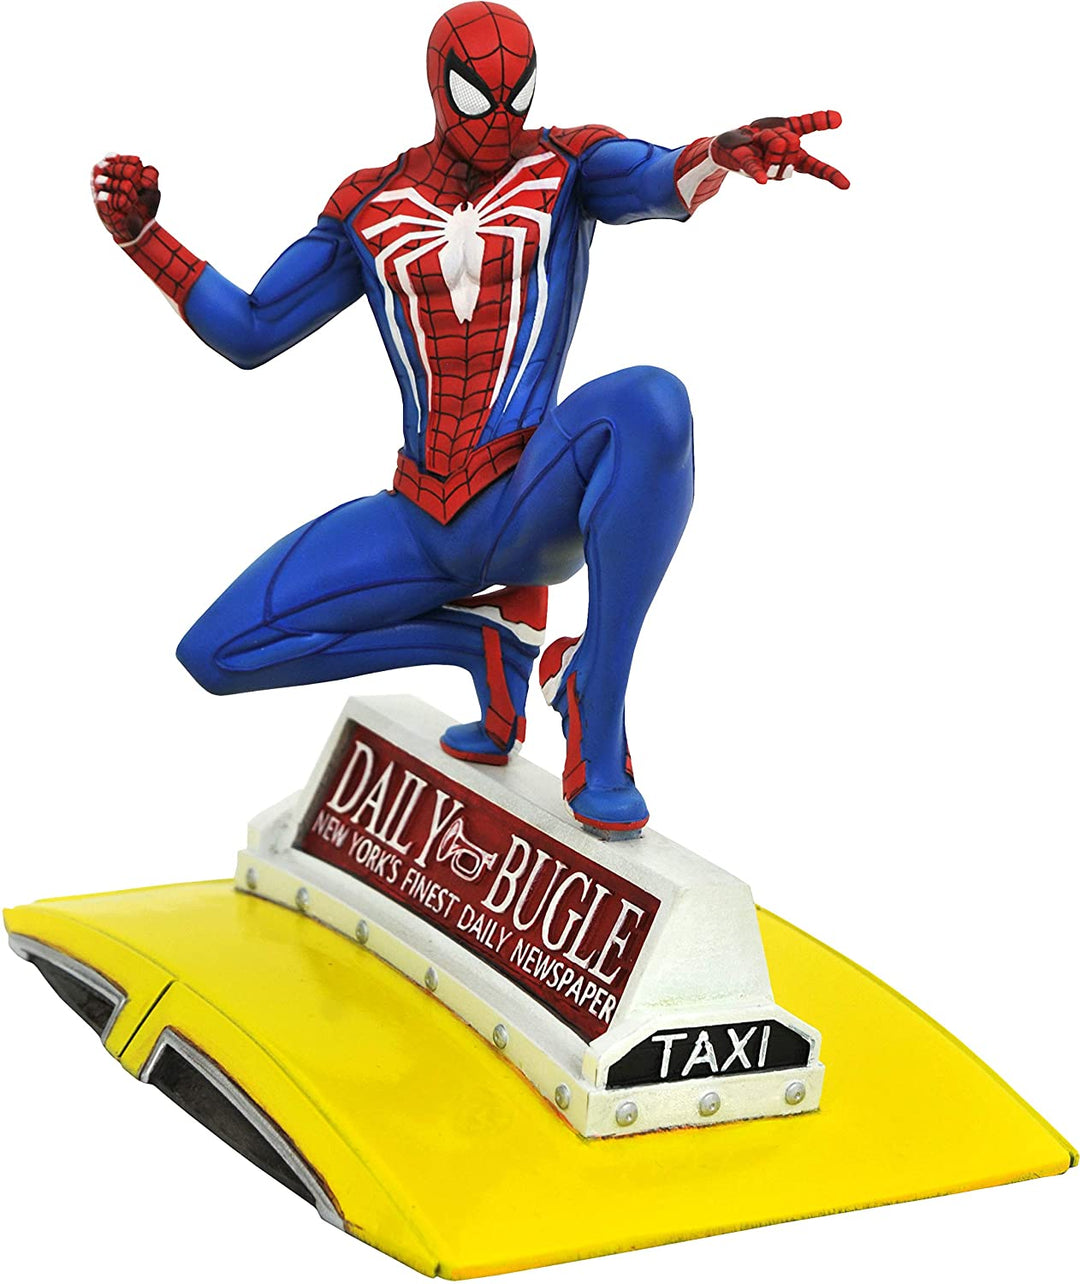 Diamond Select Toys Marvel Gallery: Spider-Man on Taxi PS4 Version PVC Figure